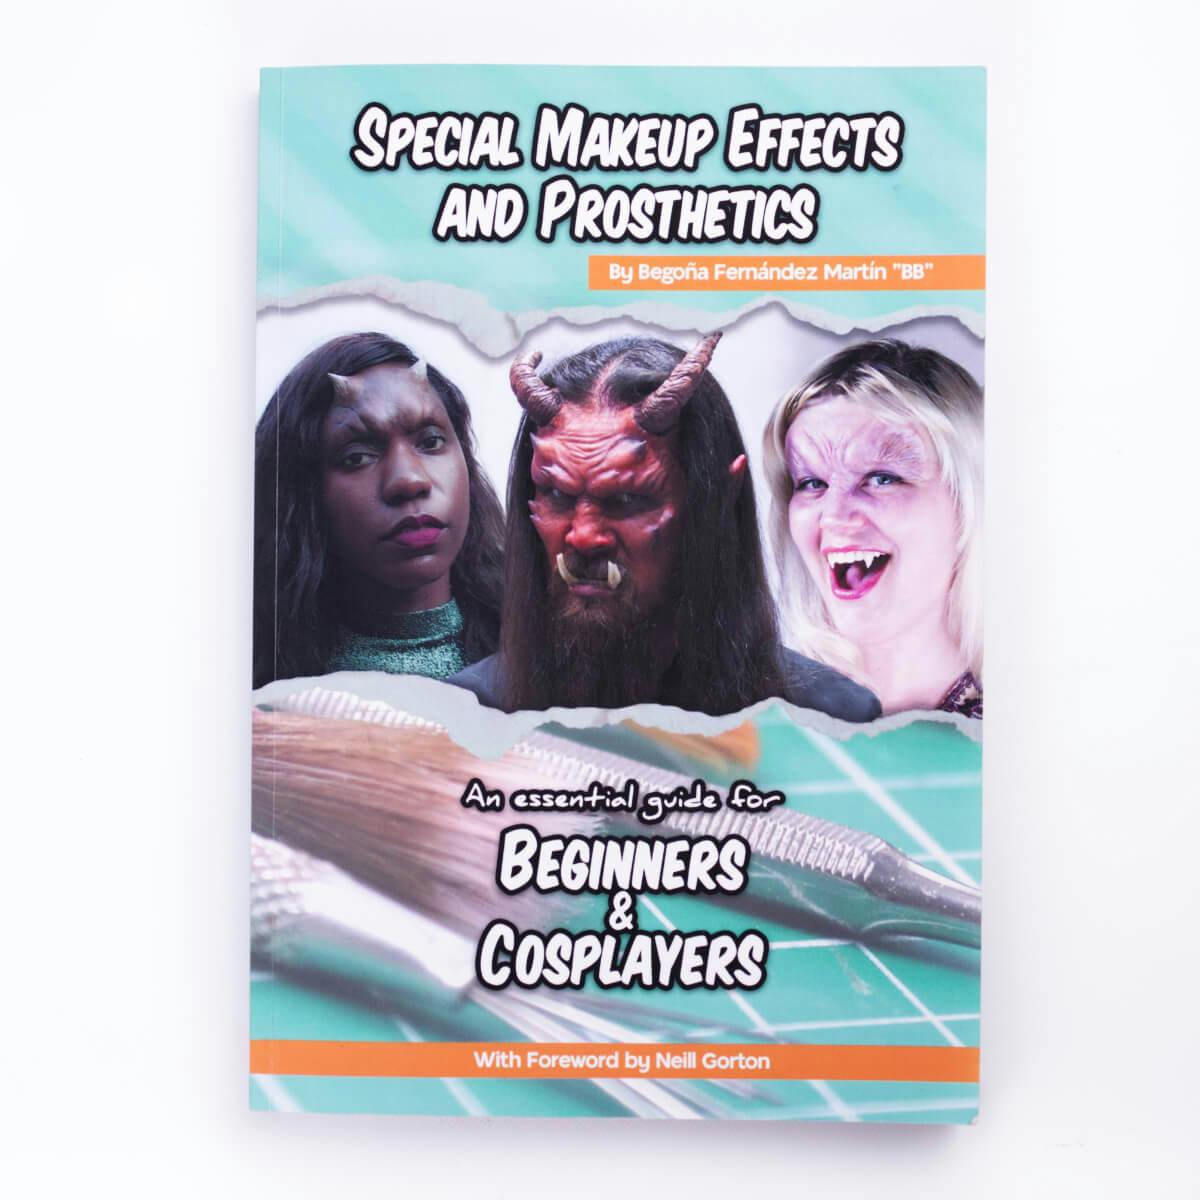 Book Special Makeup Effects and Prosthetics - the essential guide for beginners and cosplayers by Begoña F. Martín